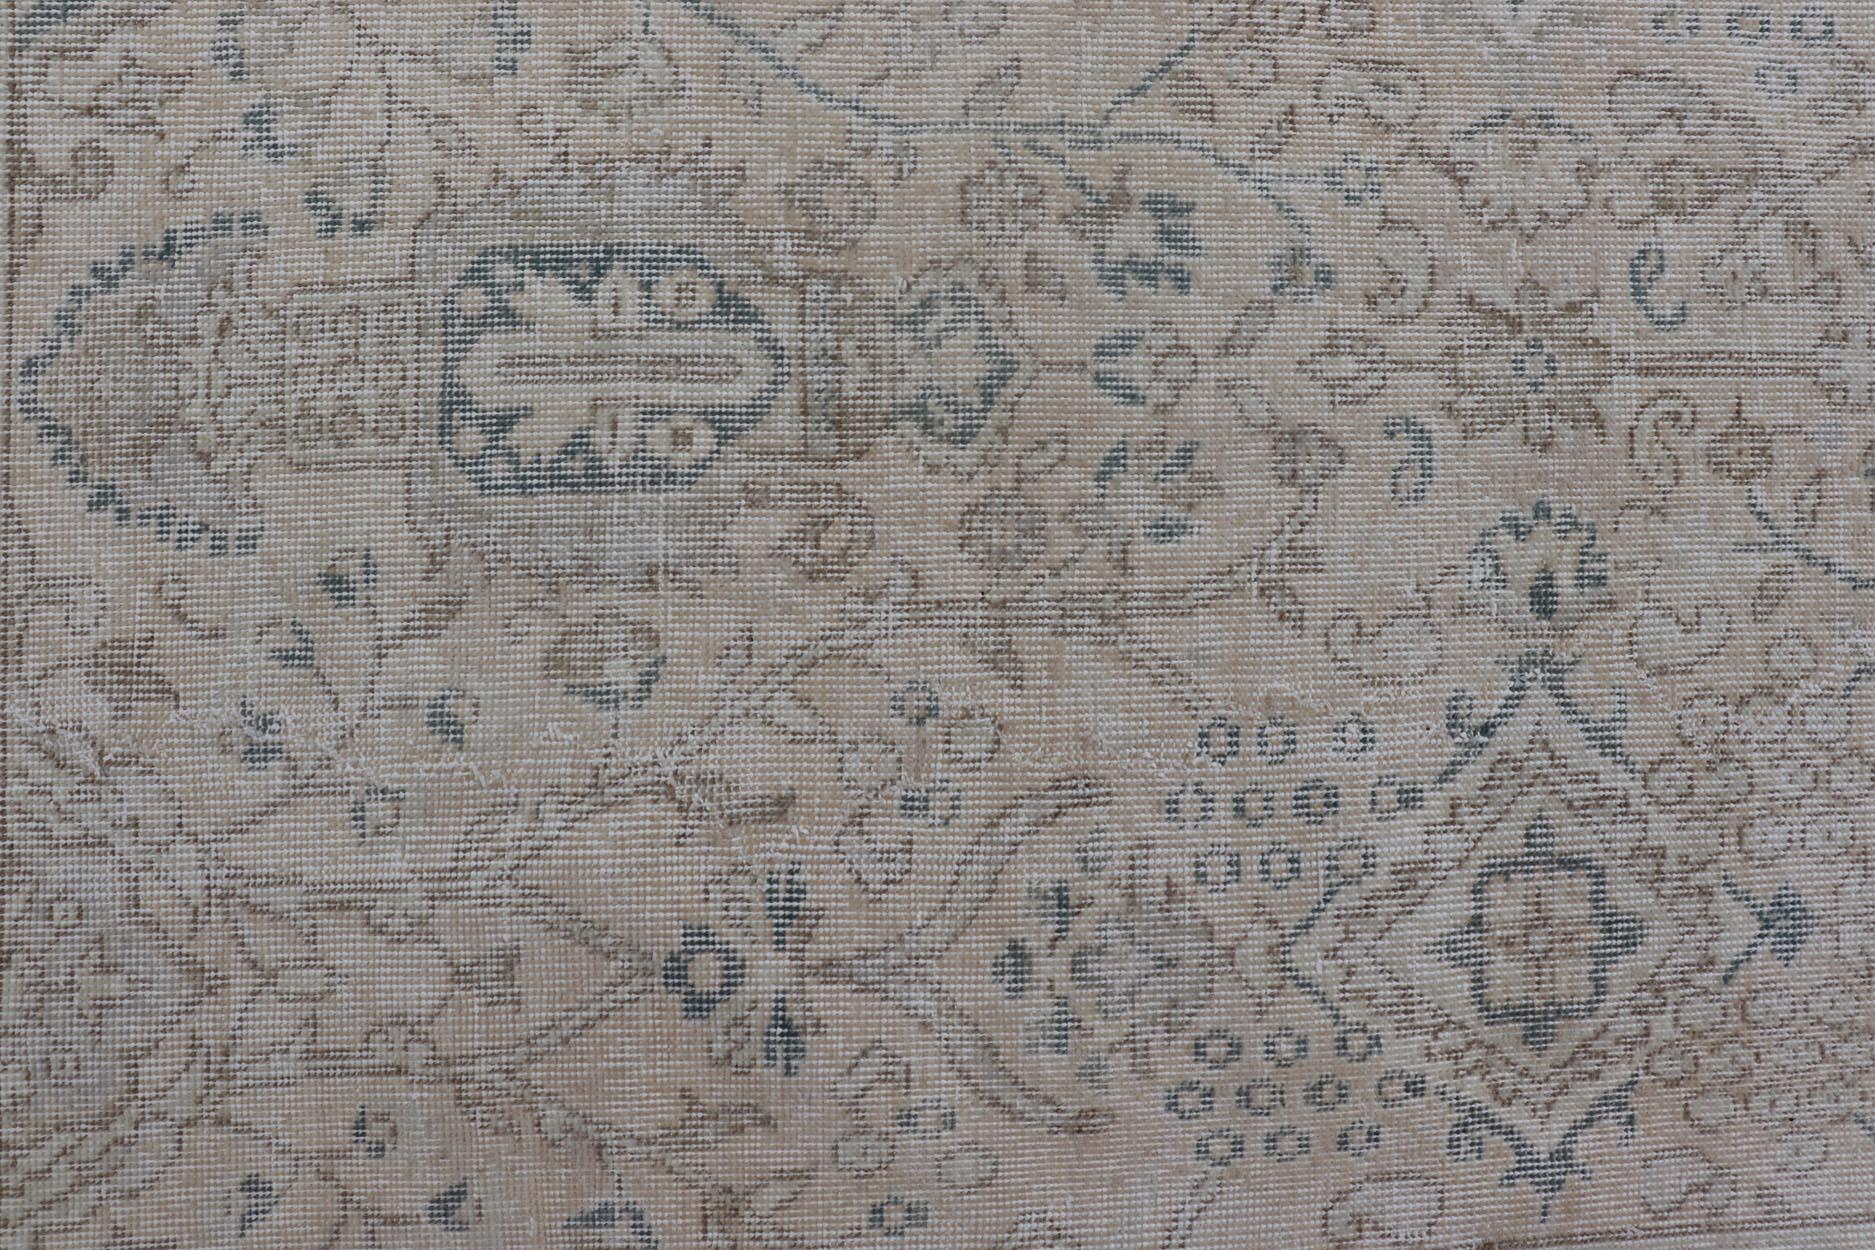 Wool Blush, Tan, & Blue Vintage Turkish Distressed Rug with All-Over Floral Design For Sale